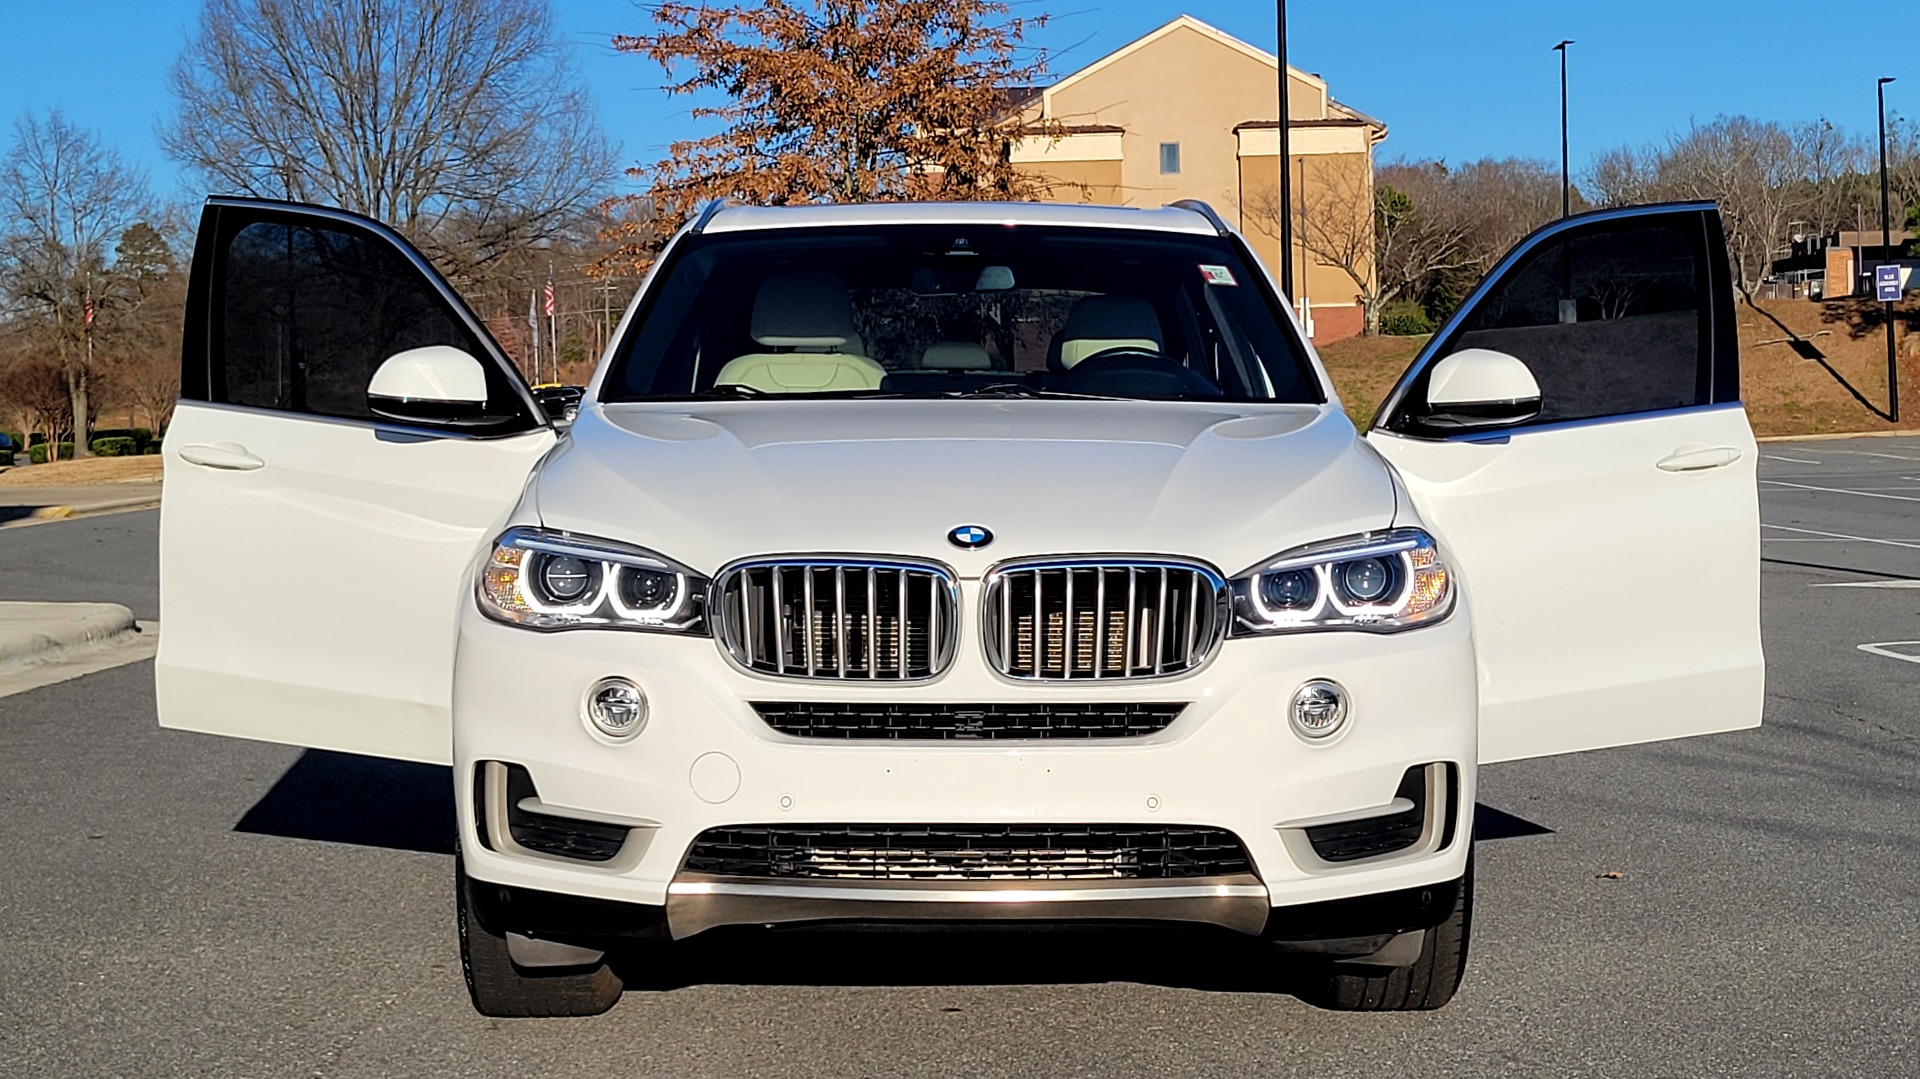 Used 2018 BMW X5 XDRIVE35I PREMIUM / DRVR ASST / HUD / WIRELESS CHARGING / HEATED SEATS for sale $42,995 at Formula Imports in Charlotte NC 28227 22